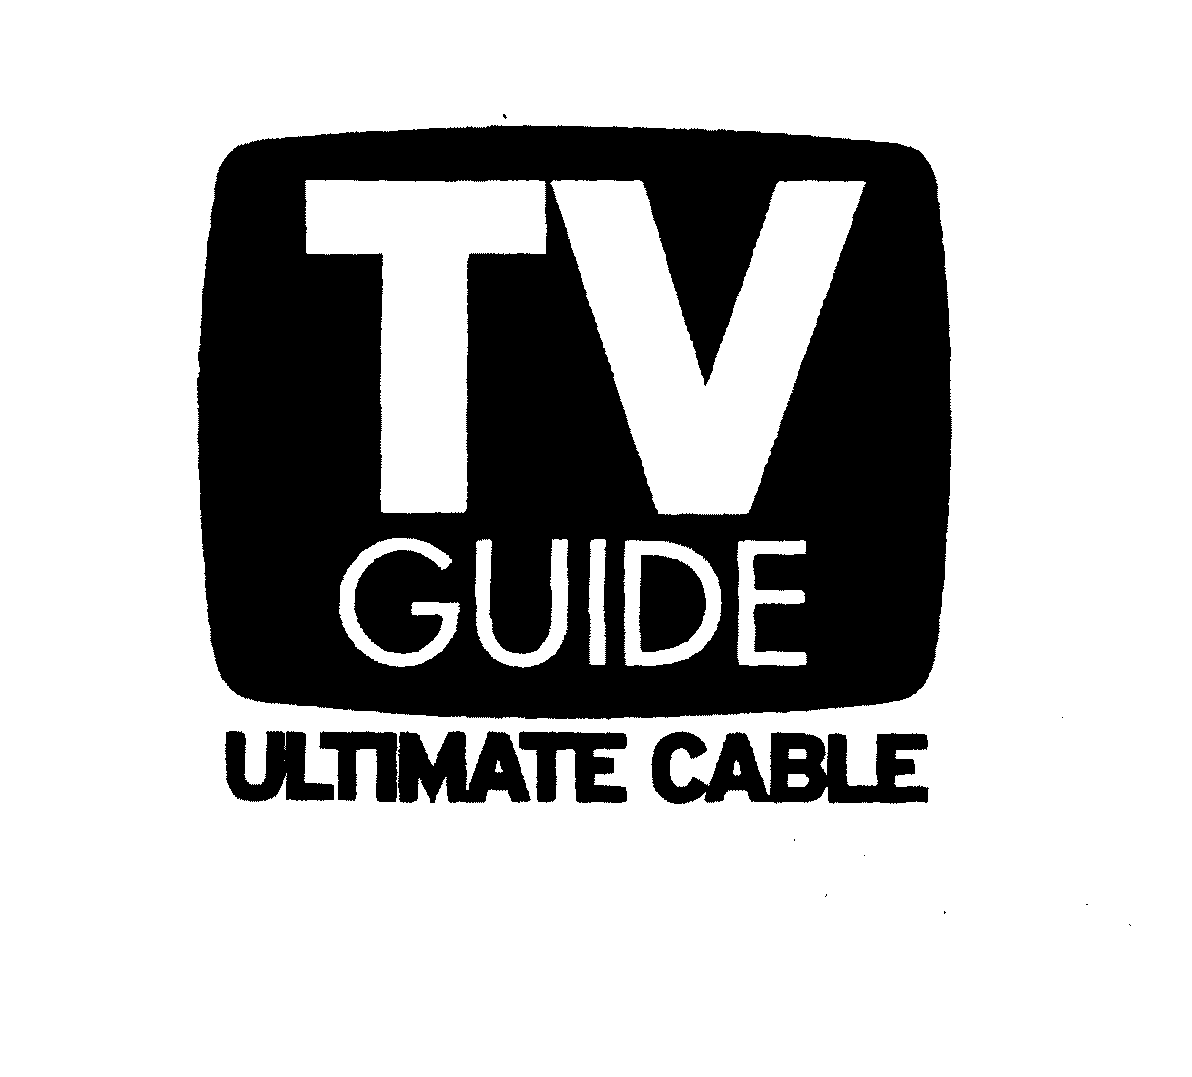  TV GUIDE ULTIMATE CABLE